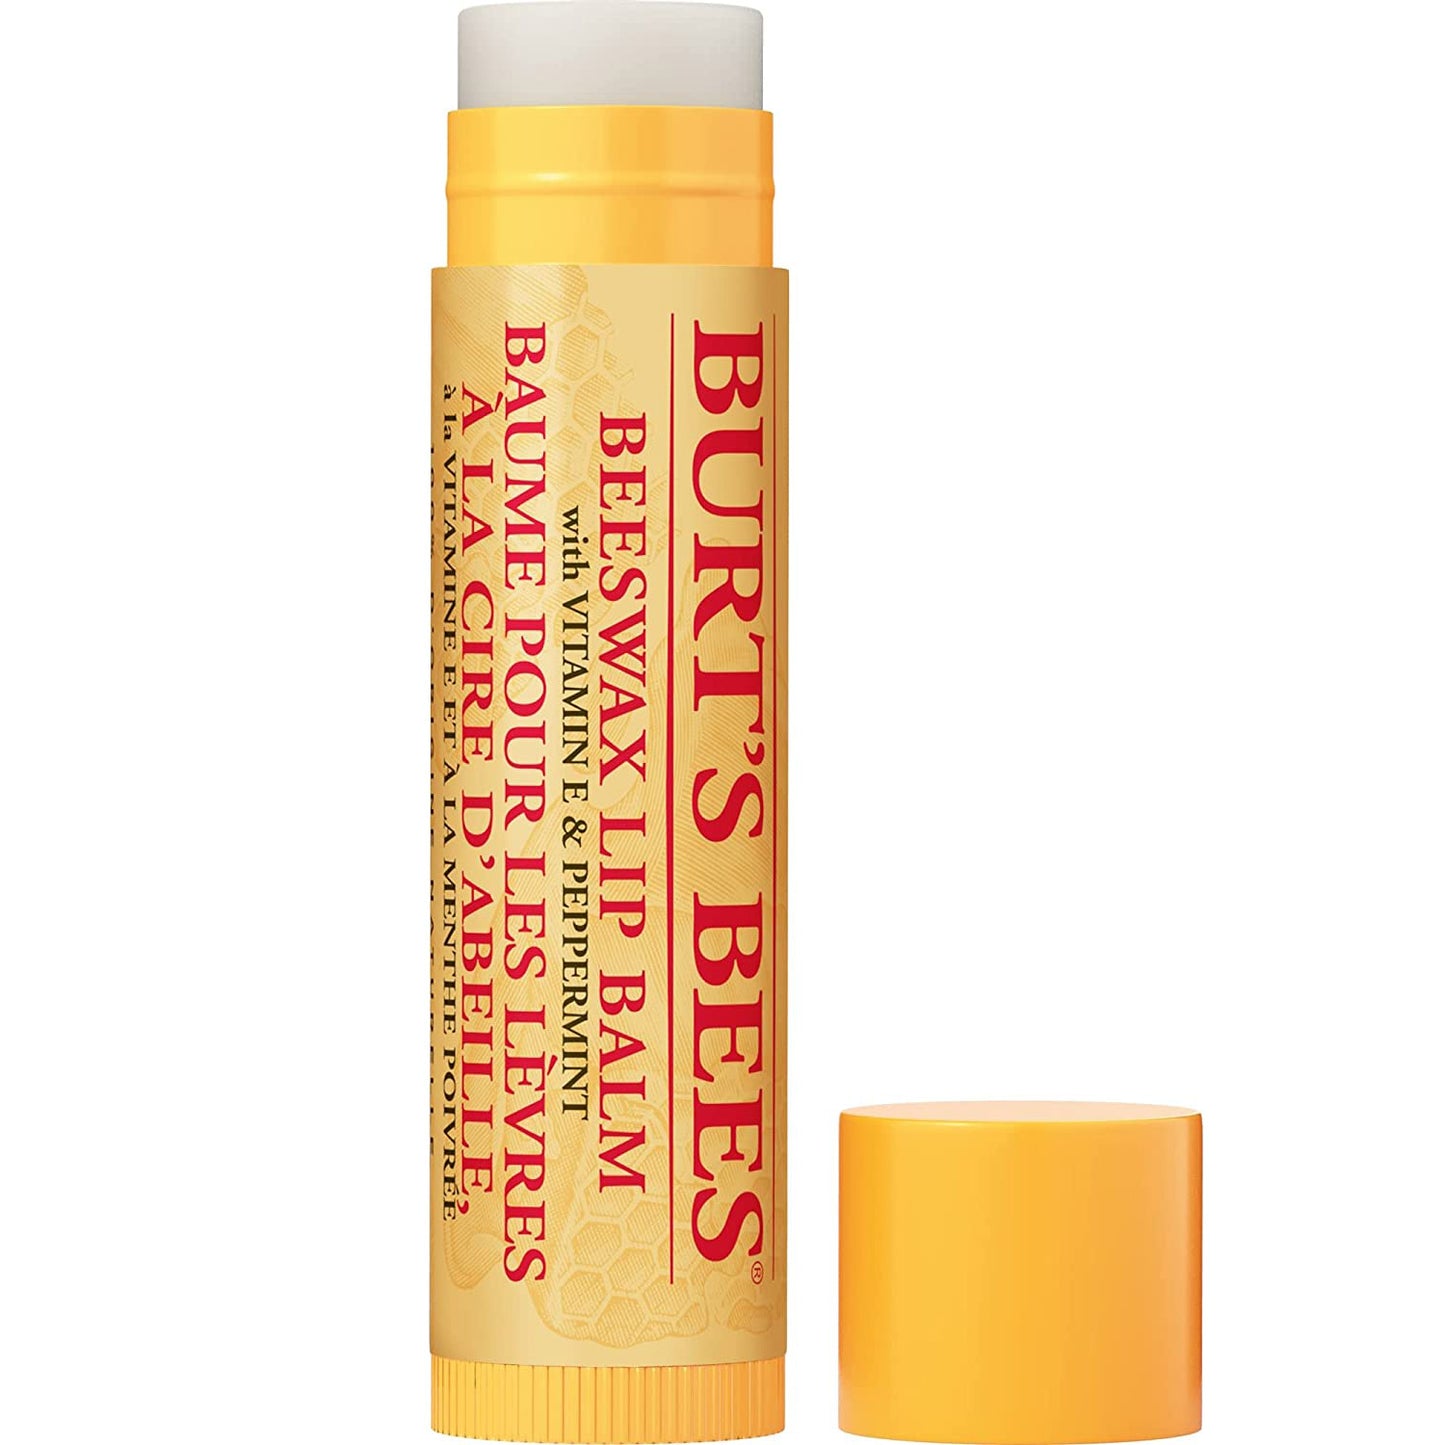 Burt's Bees Beeswax Lip Balm Peppermint (Click and Collect only)